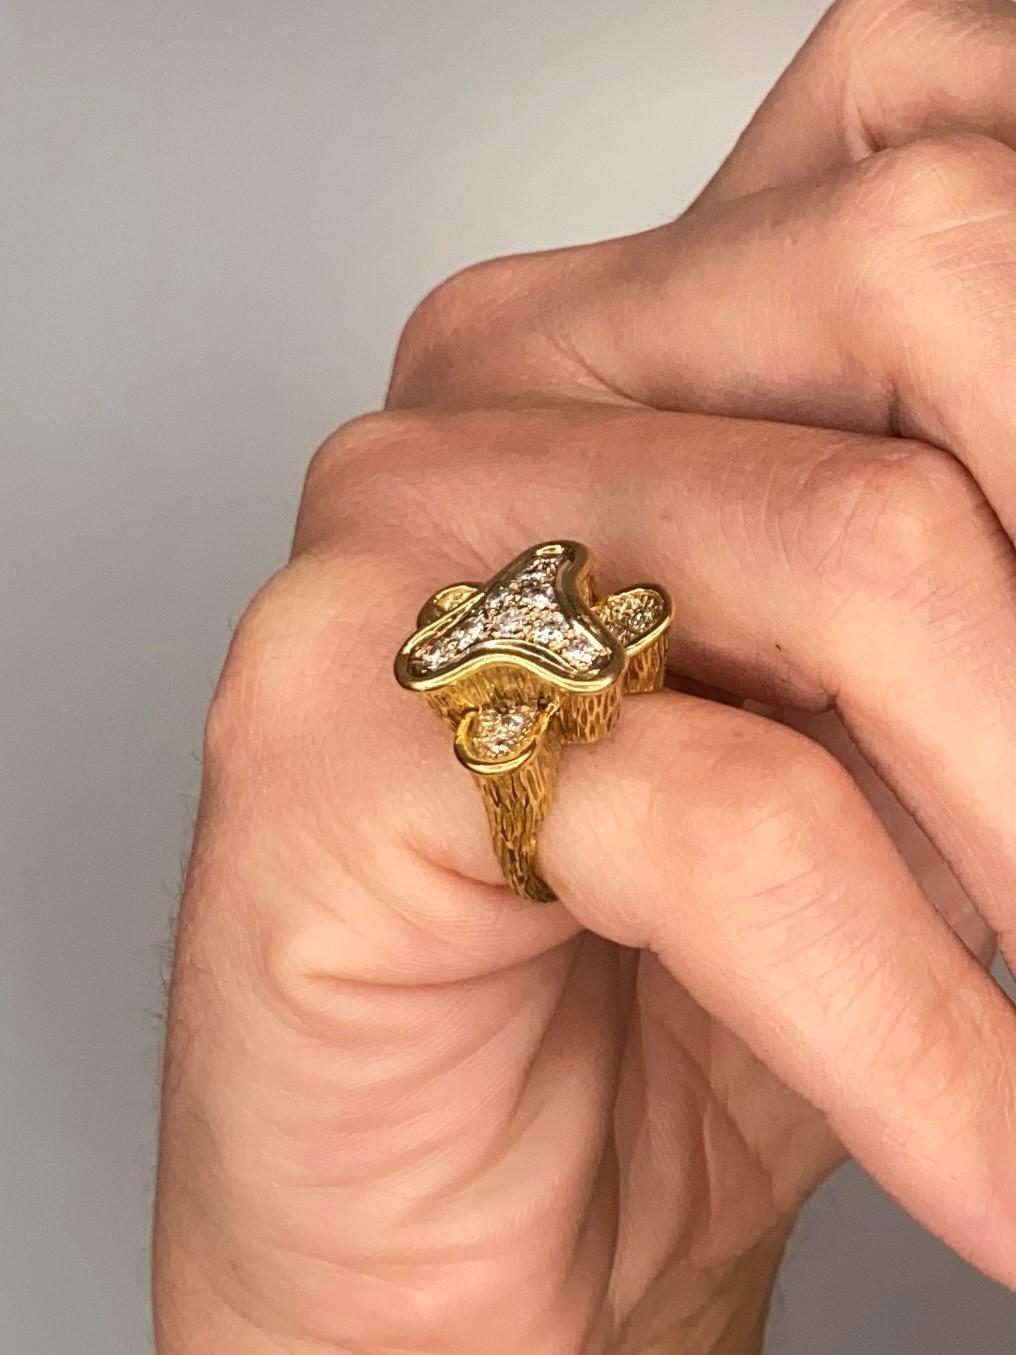 A modernism French sculptural ring.

Beautiful wearable piece of concretism art, created in Paris France in the early 1970's. This sculptural cocktail ring has been crafted with three dimensional free forms in solid yellow gold with textured